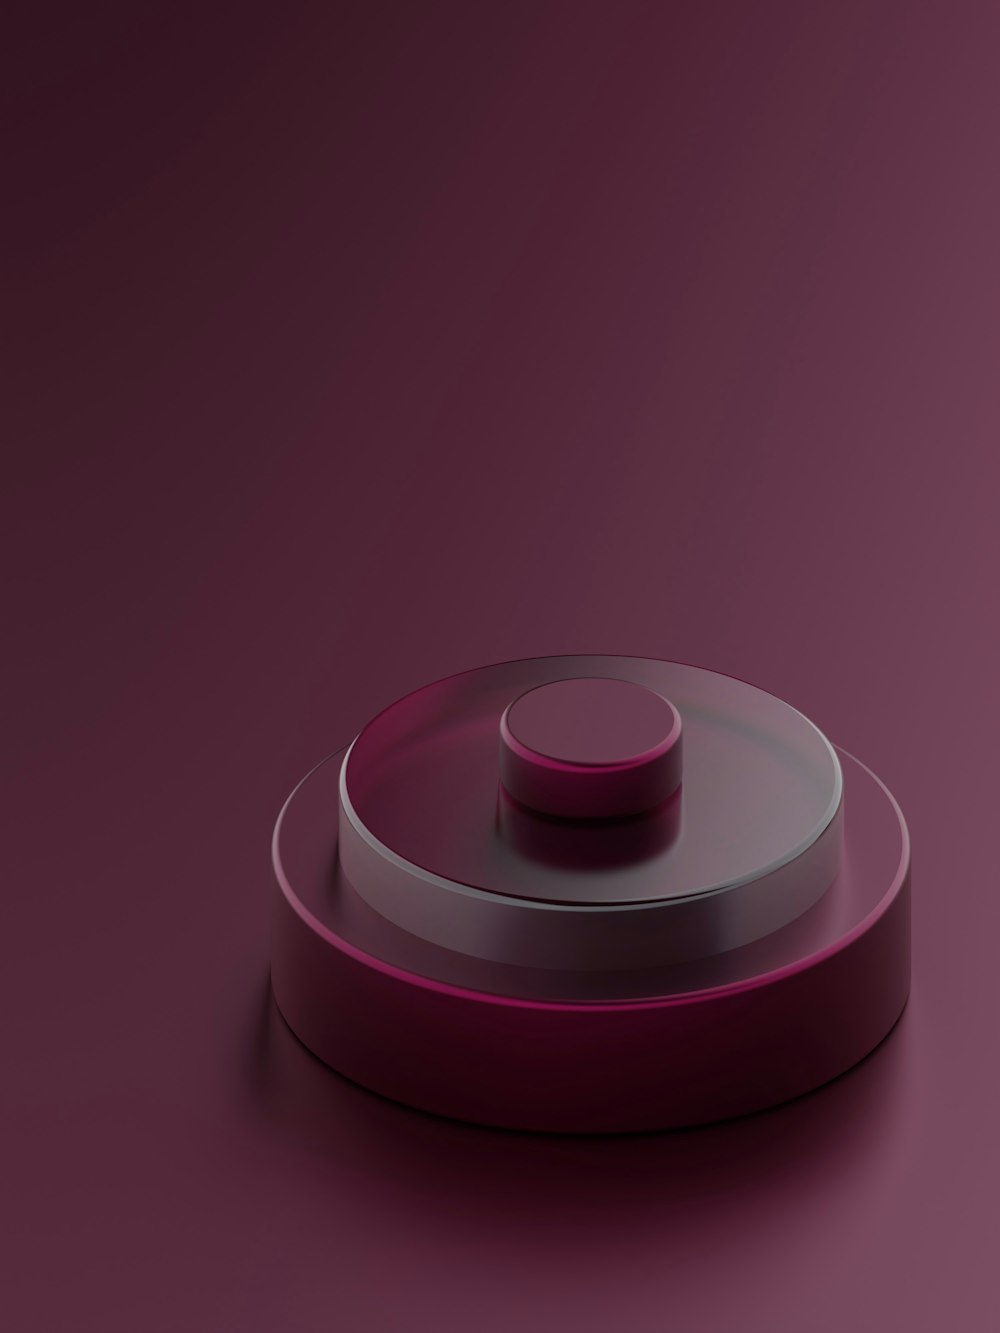 a round object with a pink base on a purple surface